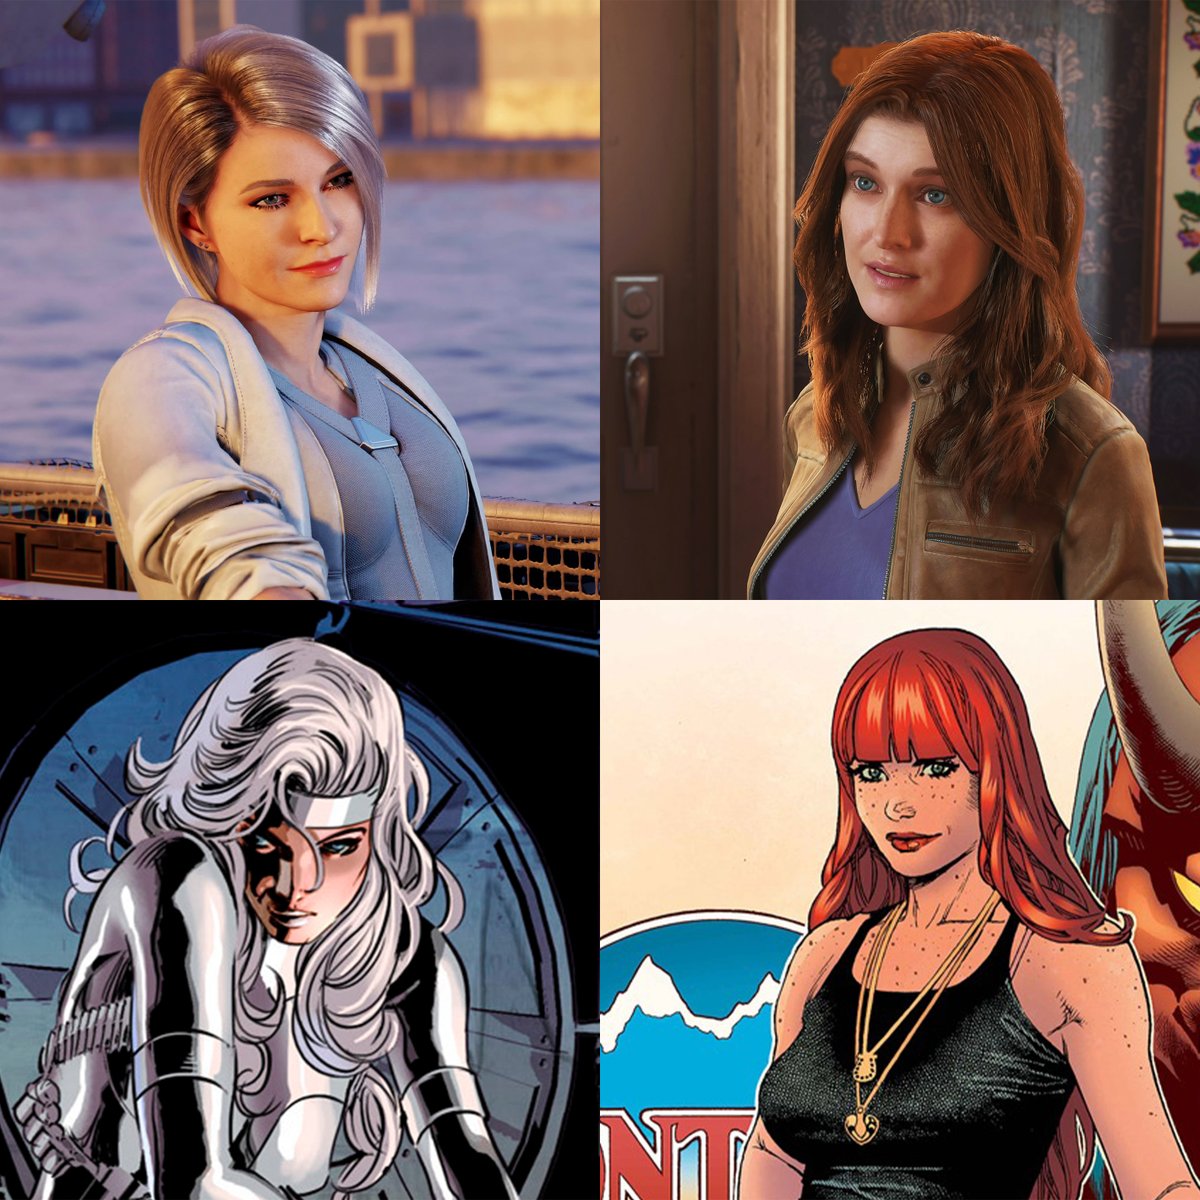 Silver Sable's comic accurate redesign coming soon, and then Mary Jane. They look wholly different with the original face model. Insomniac Sable is short and super slim. Now, she's more athletic fit and tall like 616. Mary Jane looks so chef kisses. Stay tuned ❤